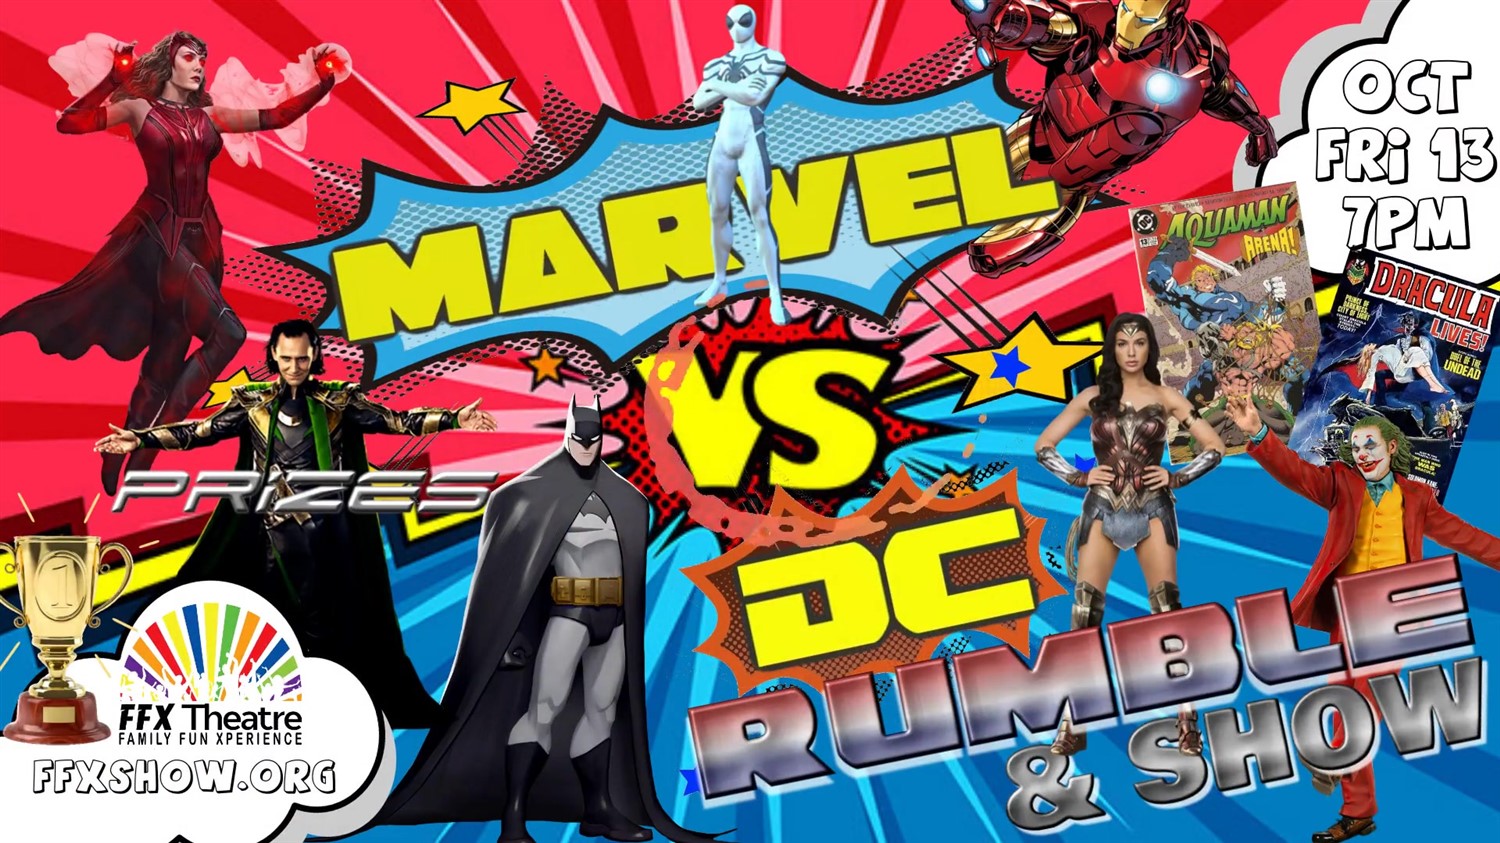 MARVEL vs. DC RUMBLE & SHOW Epic Games & Costume Contest! on Oct 13, 19:00@FFX Theatre - Pick a seat, Buy tickets and Get information on Family Fun Xperience tickets.ffxshow.org